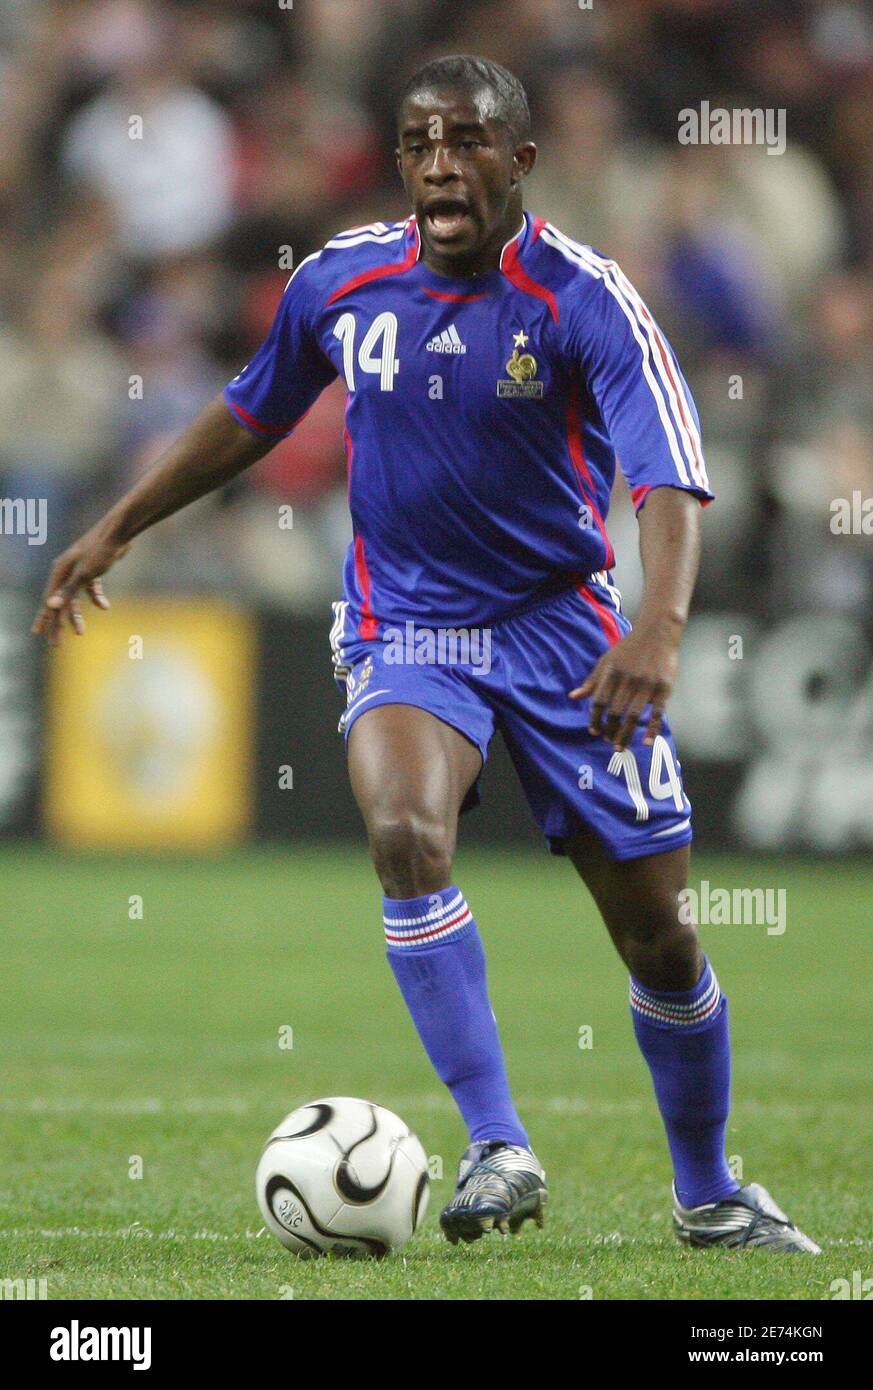 France's Rio Antonio Mavuba in action during the international friendly match, France vs Austria at the Stade de France, in Saint-Denis, near Paris on March 28, 2007. France won 1-0. Photo by Mehdi Taamallah/Cameleon/ABACAPRESS.COM Stock Photo